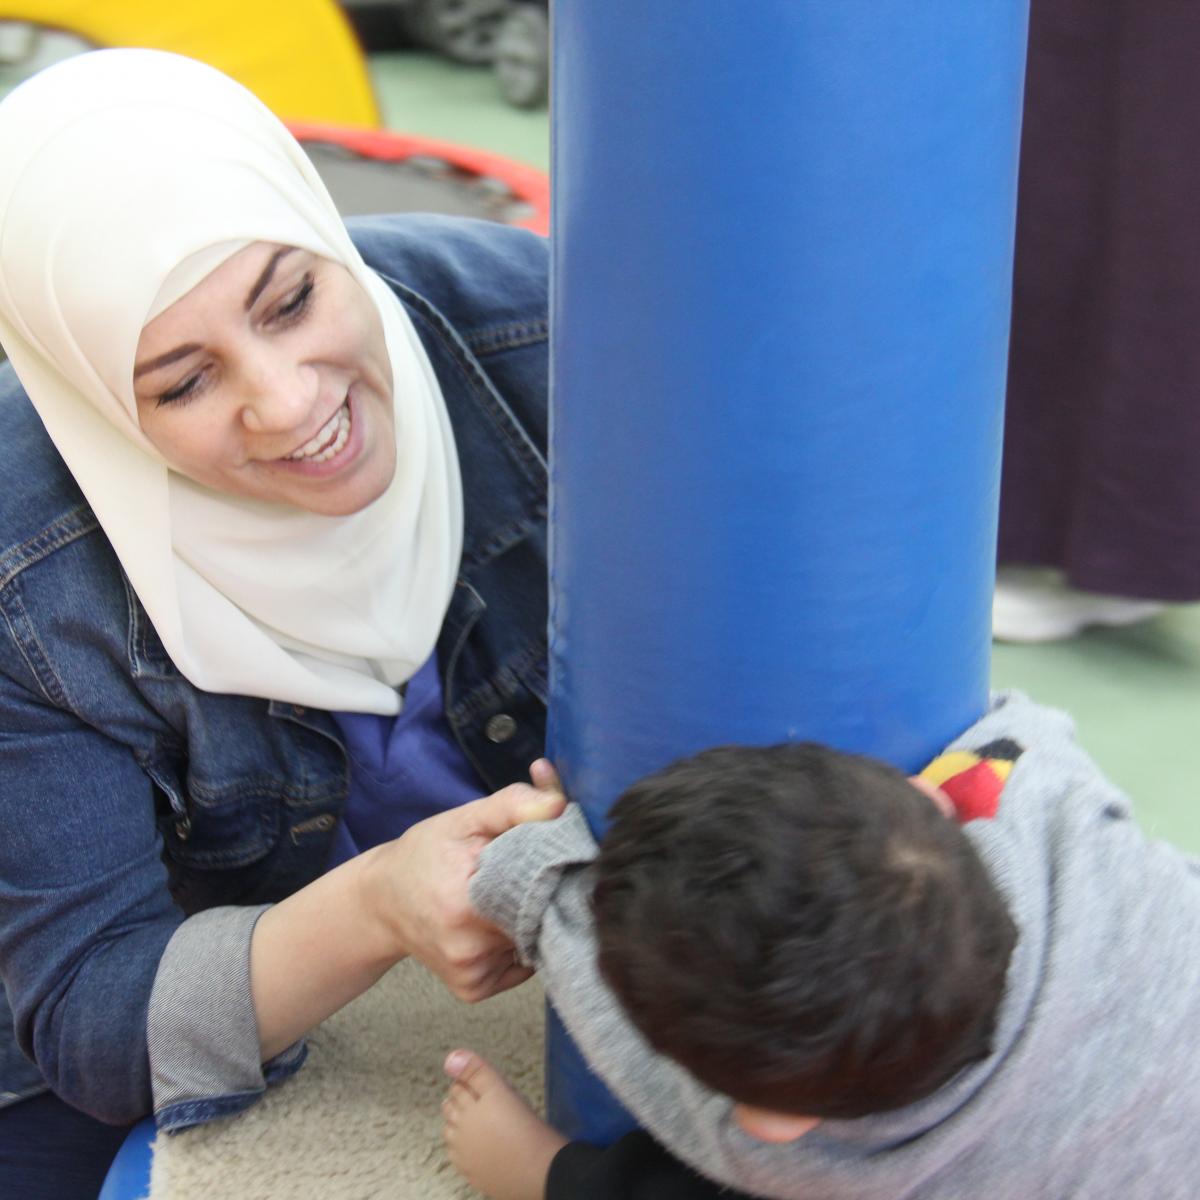 At the Jerusalem Princess Basma Center, therapists work with Palestinian children with disabilities to address their physical and emotional needs.